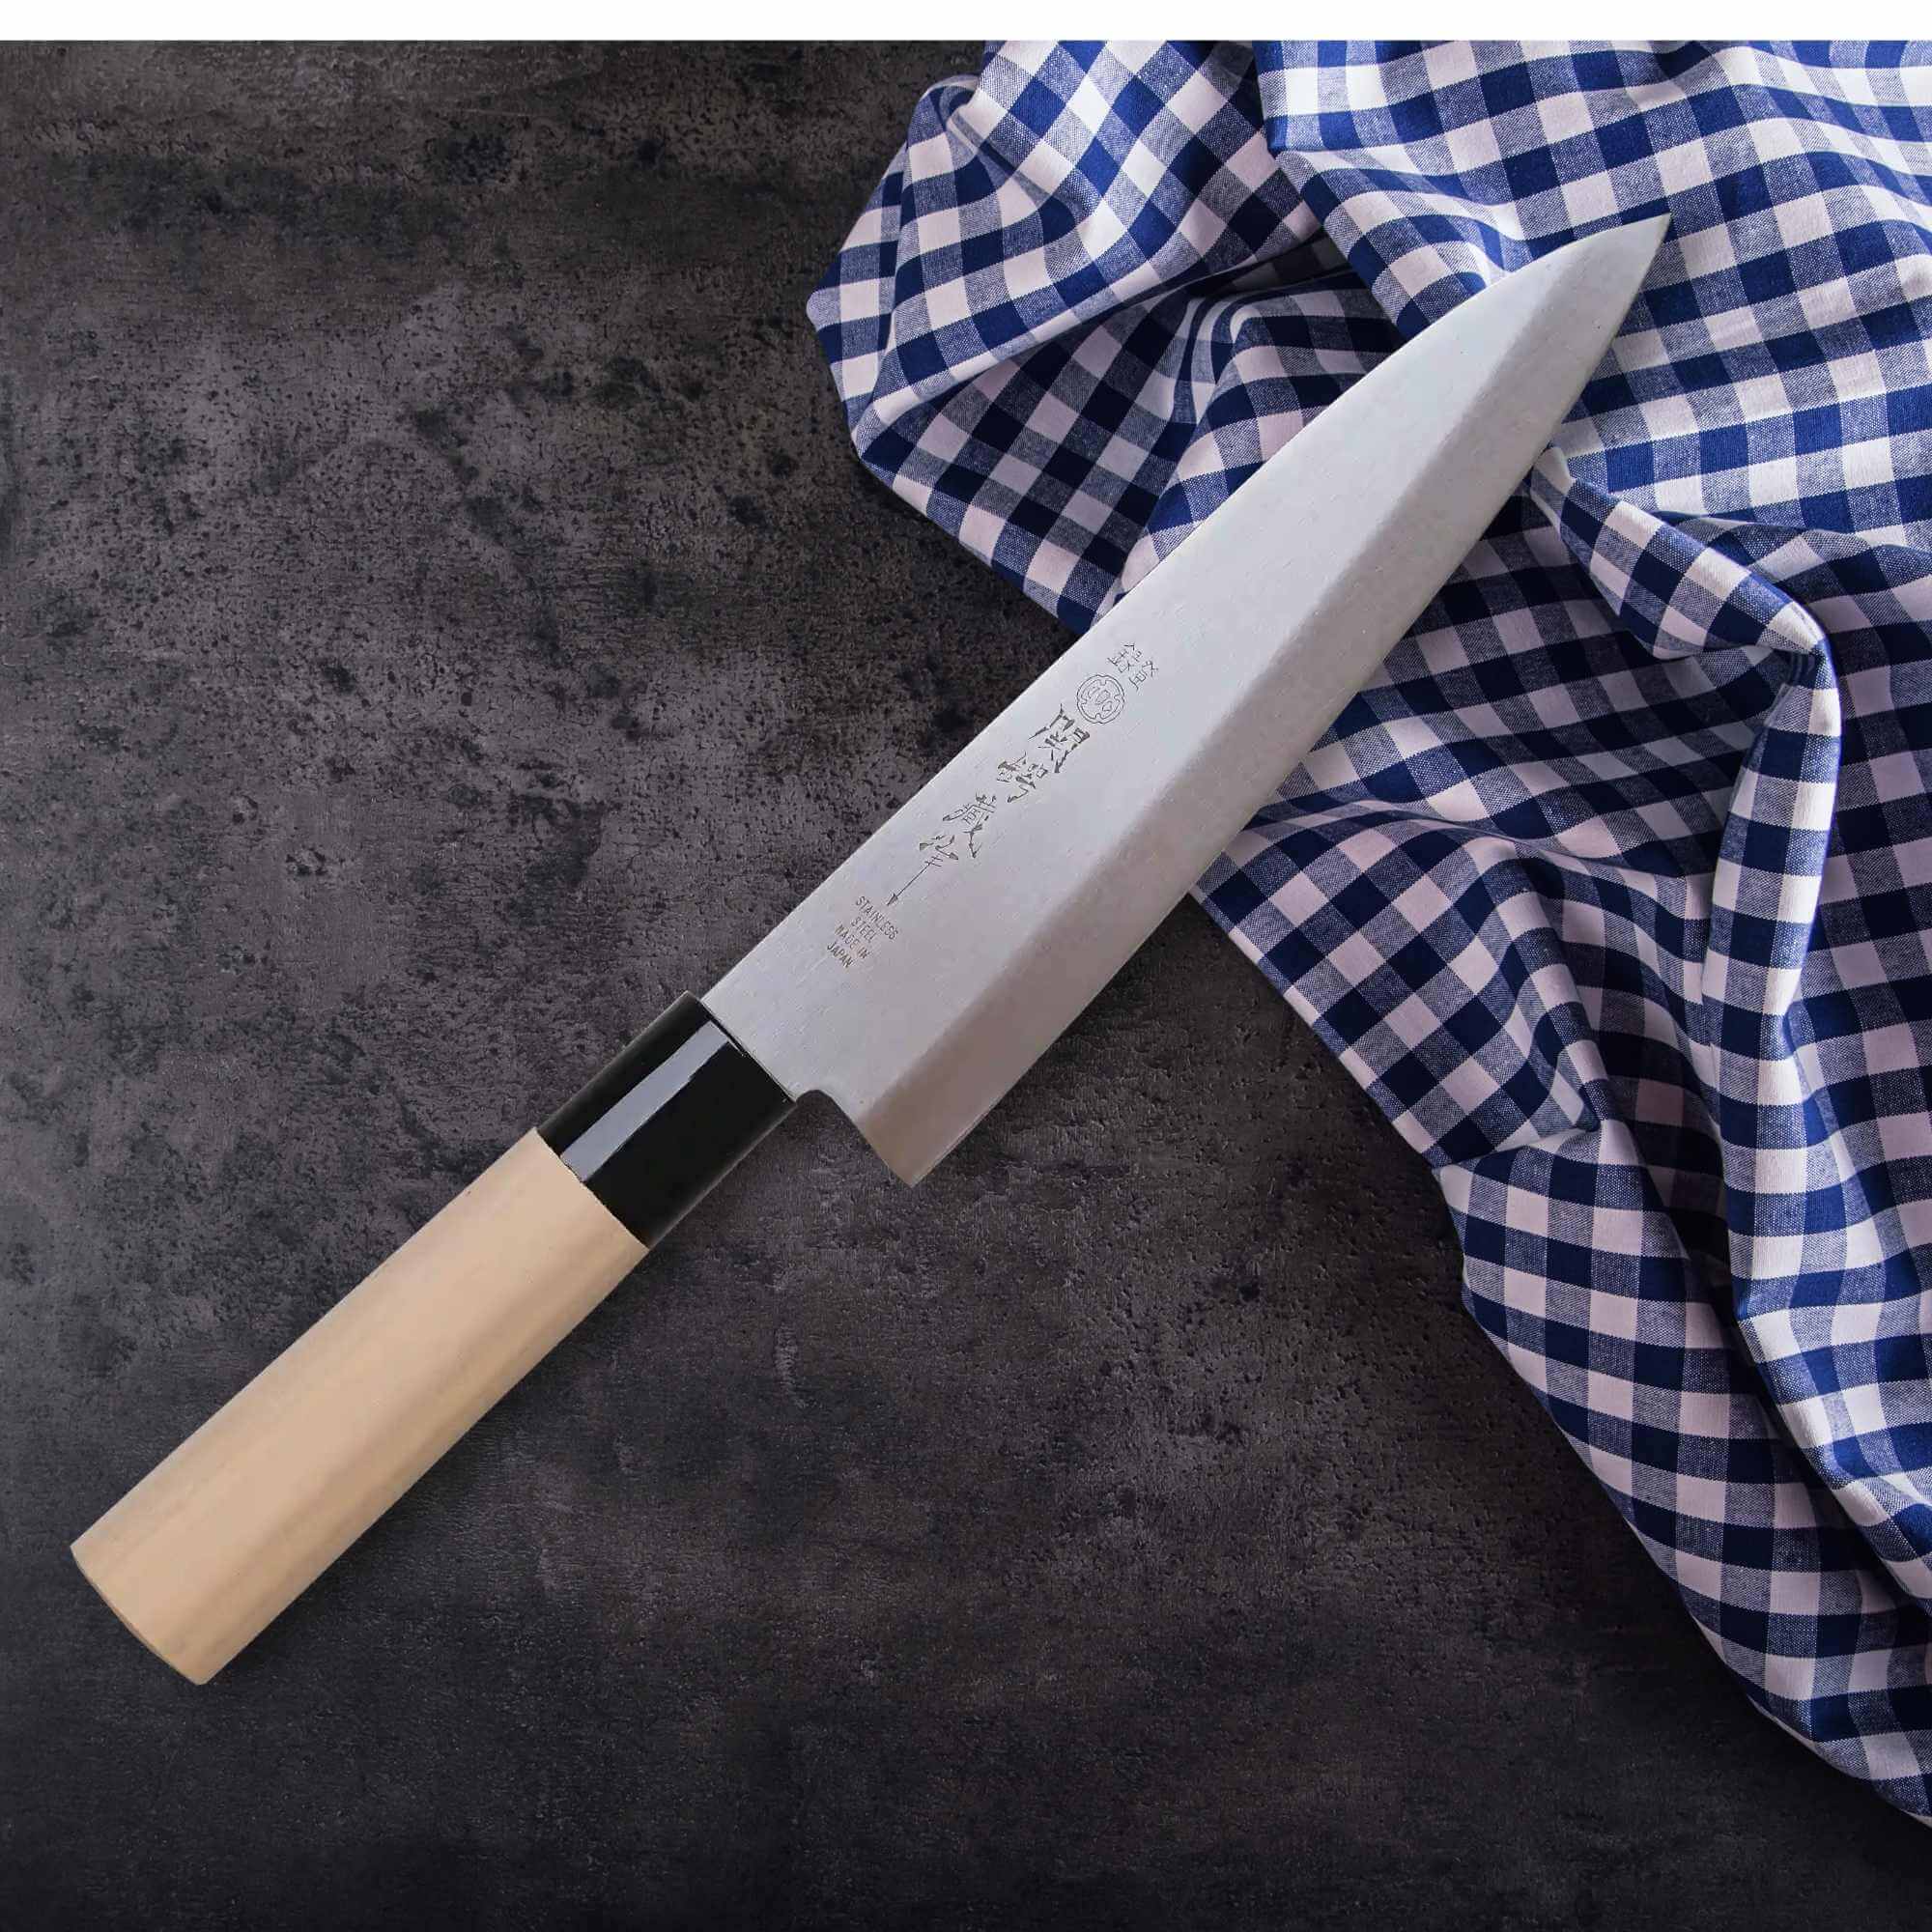 Tsubazo - Gyuto 180mm - Stainless Steel blade | Made in Japan